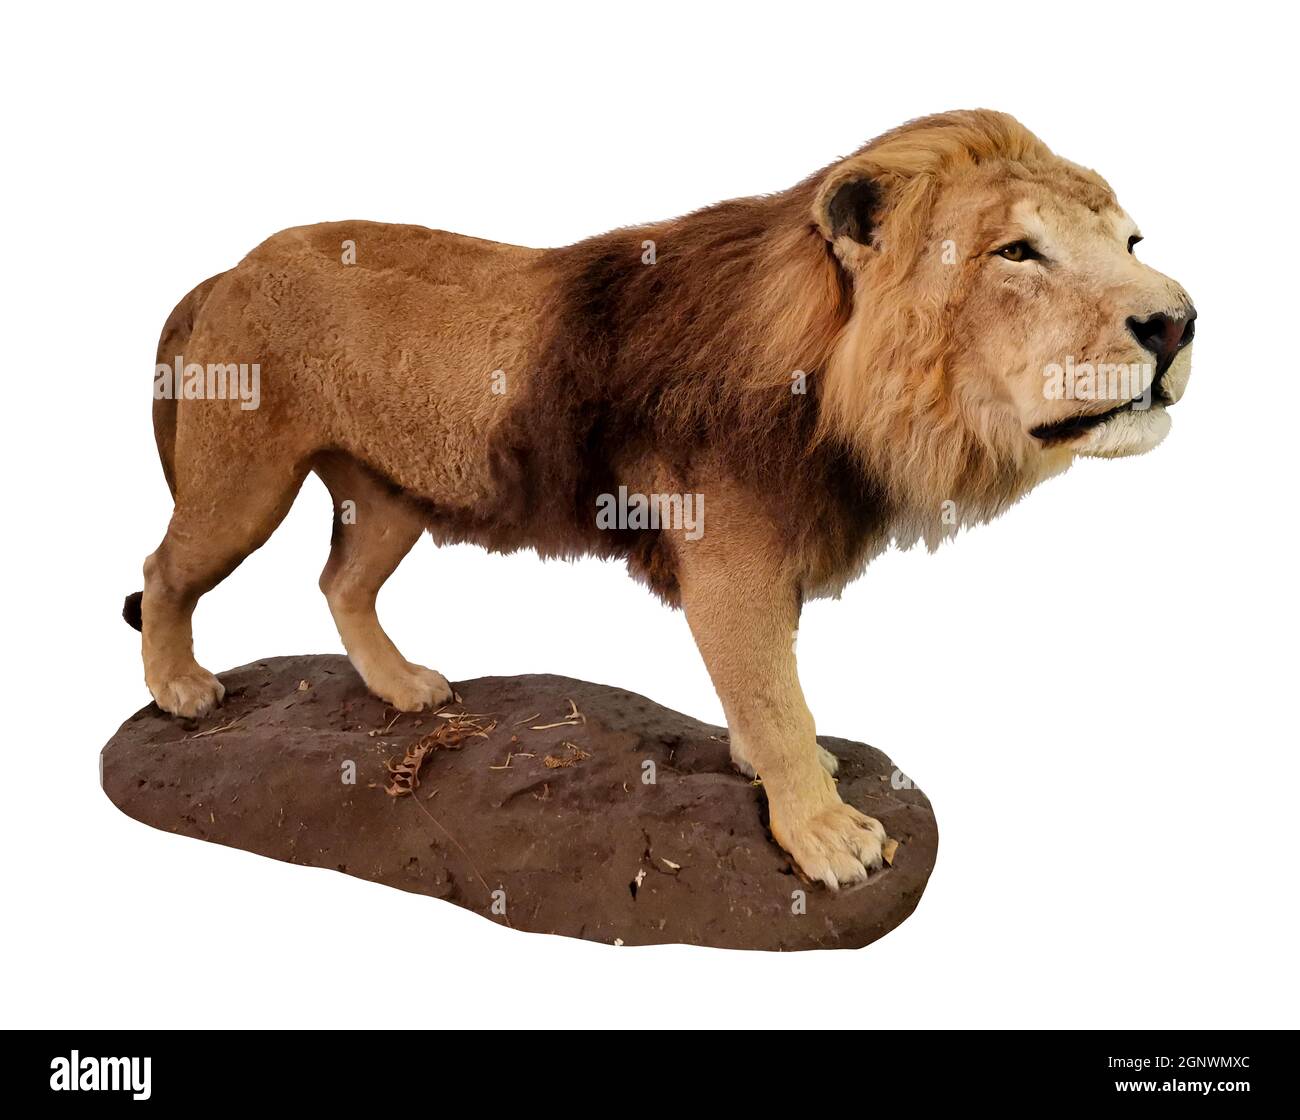 Rare Asiatic lion. Indian lion isolated photo. Big dangerous cat on the hunt. Stock Photo